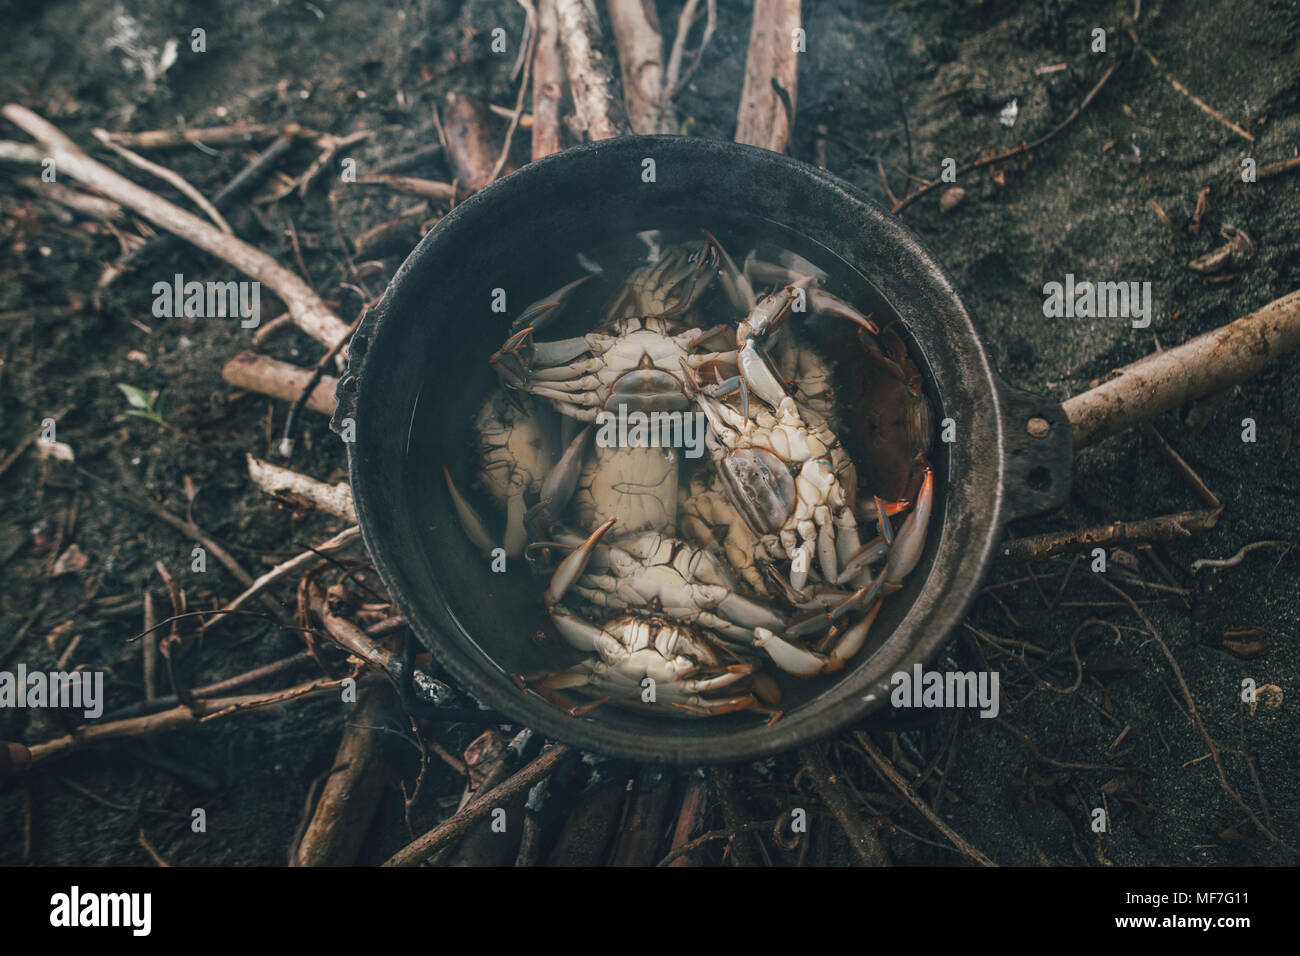 Crabs caught in a pot with water Stock Photo